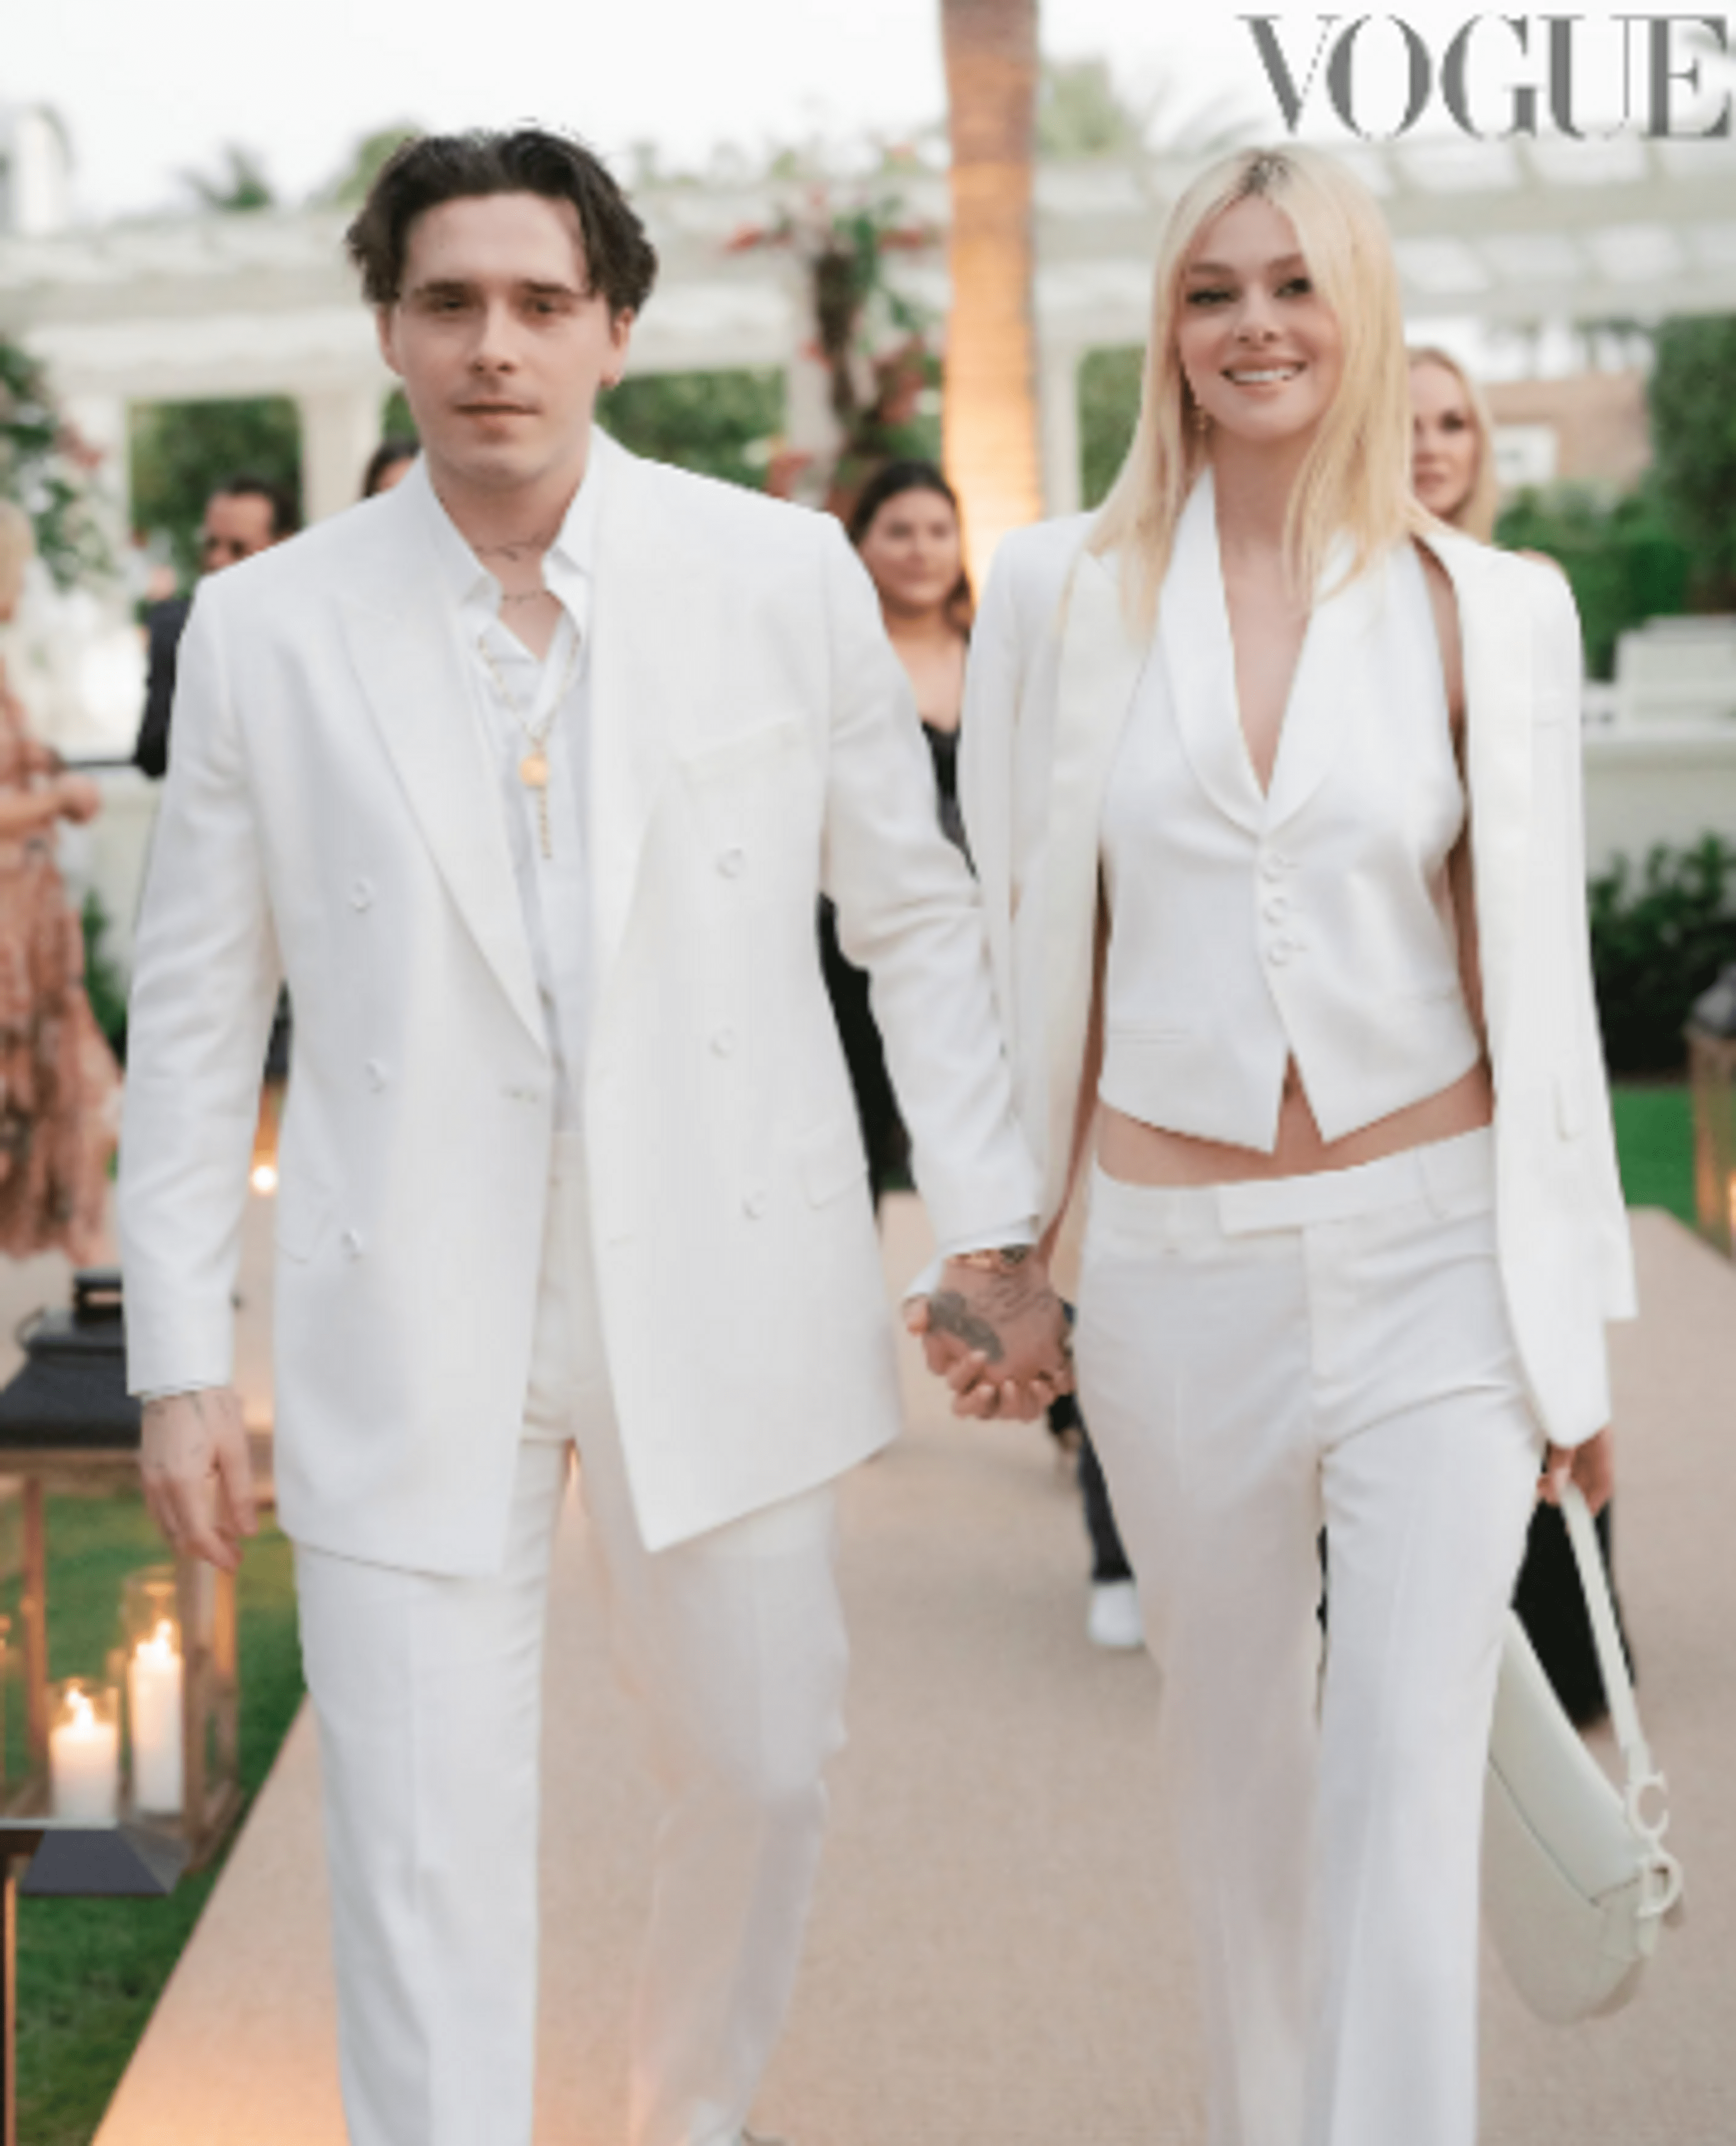 ”british-vogue-has-published-new-photos-and-details-from-the-wedding-of-brooklyn-beckham-and-nicola-peltz”